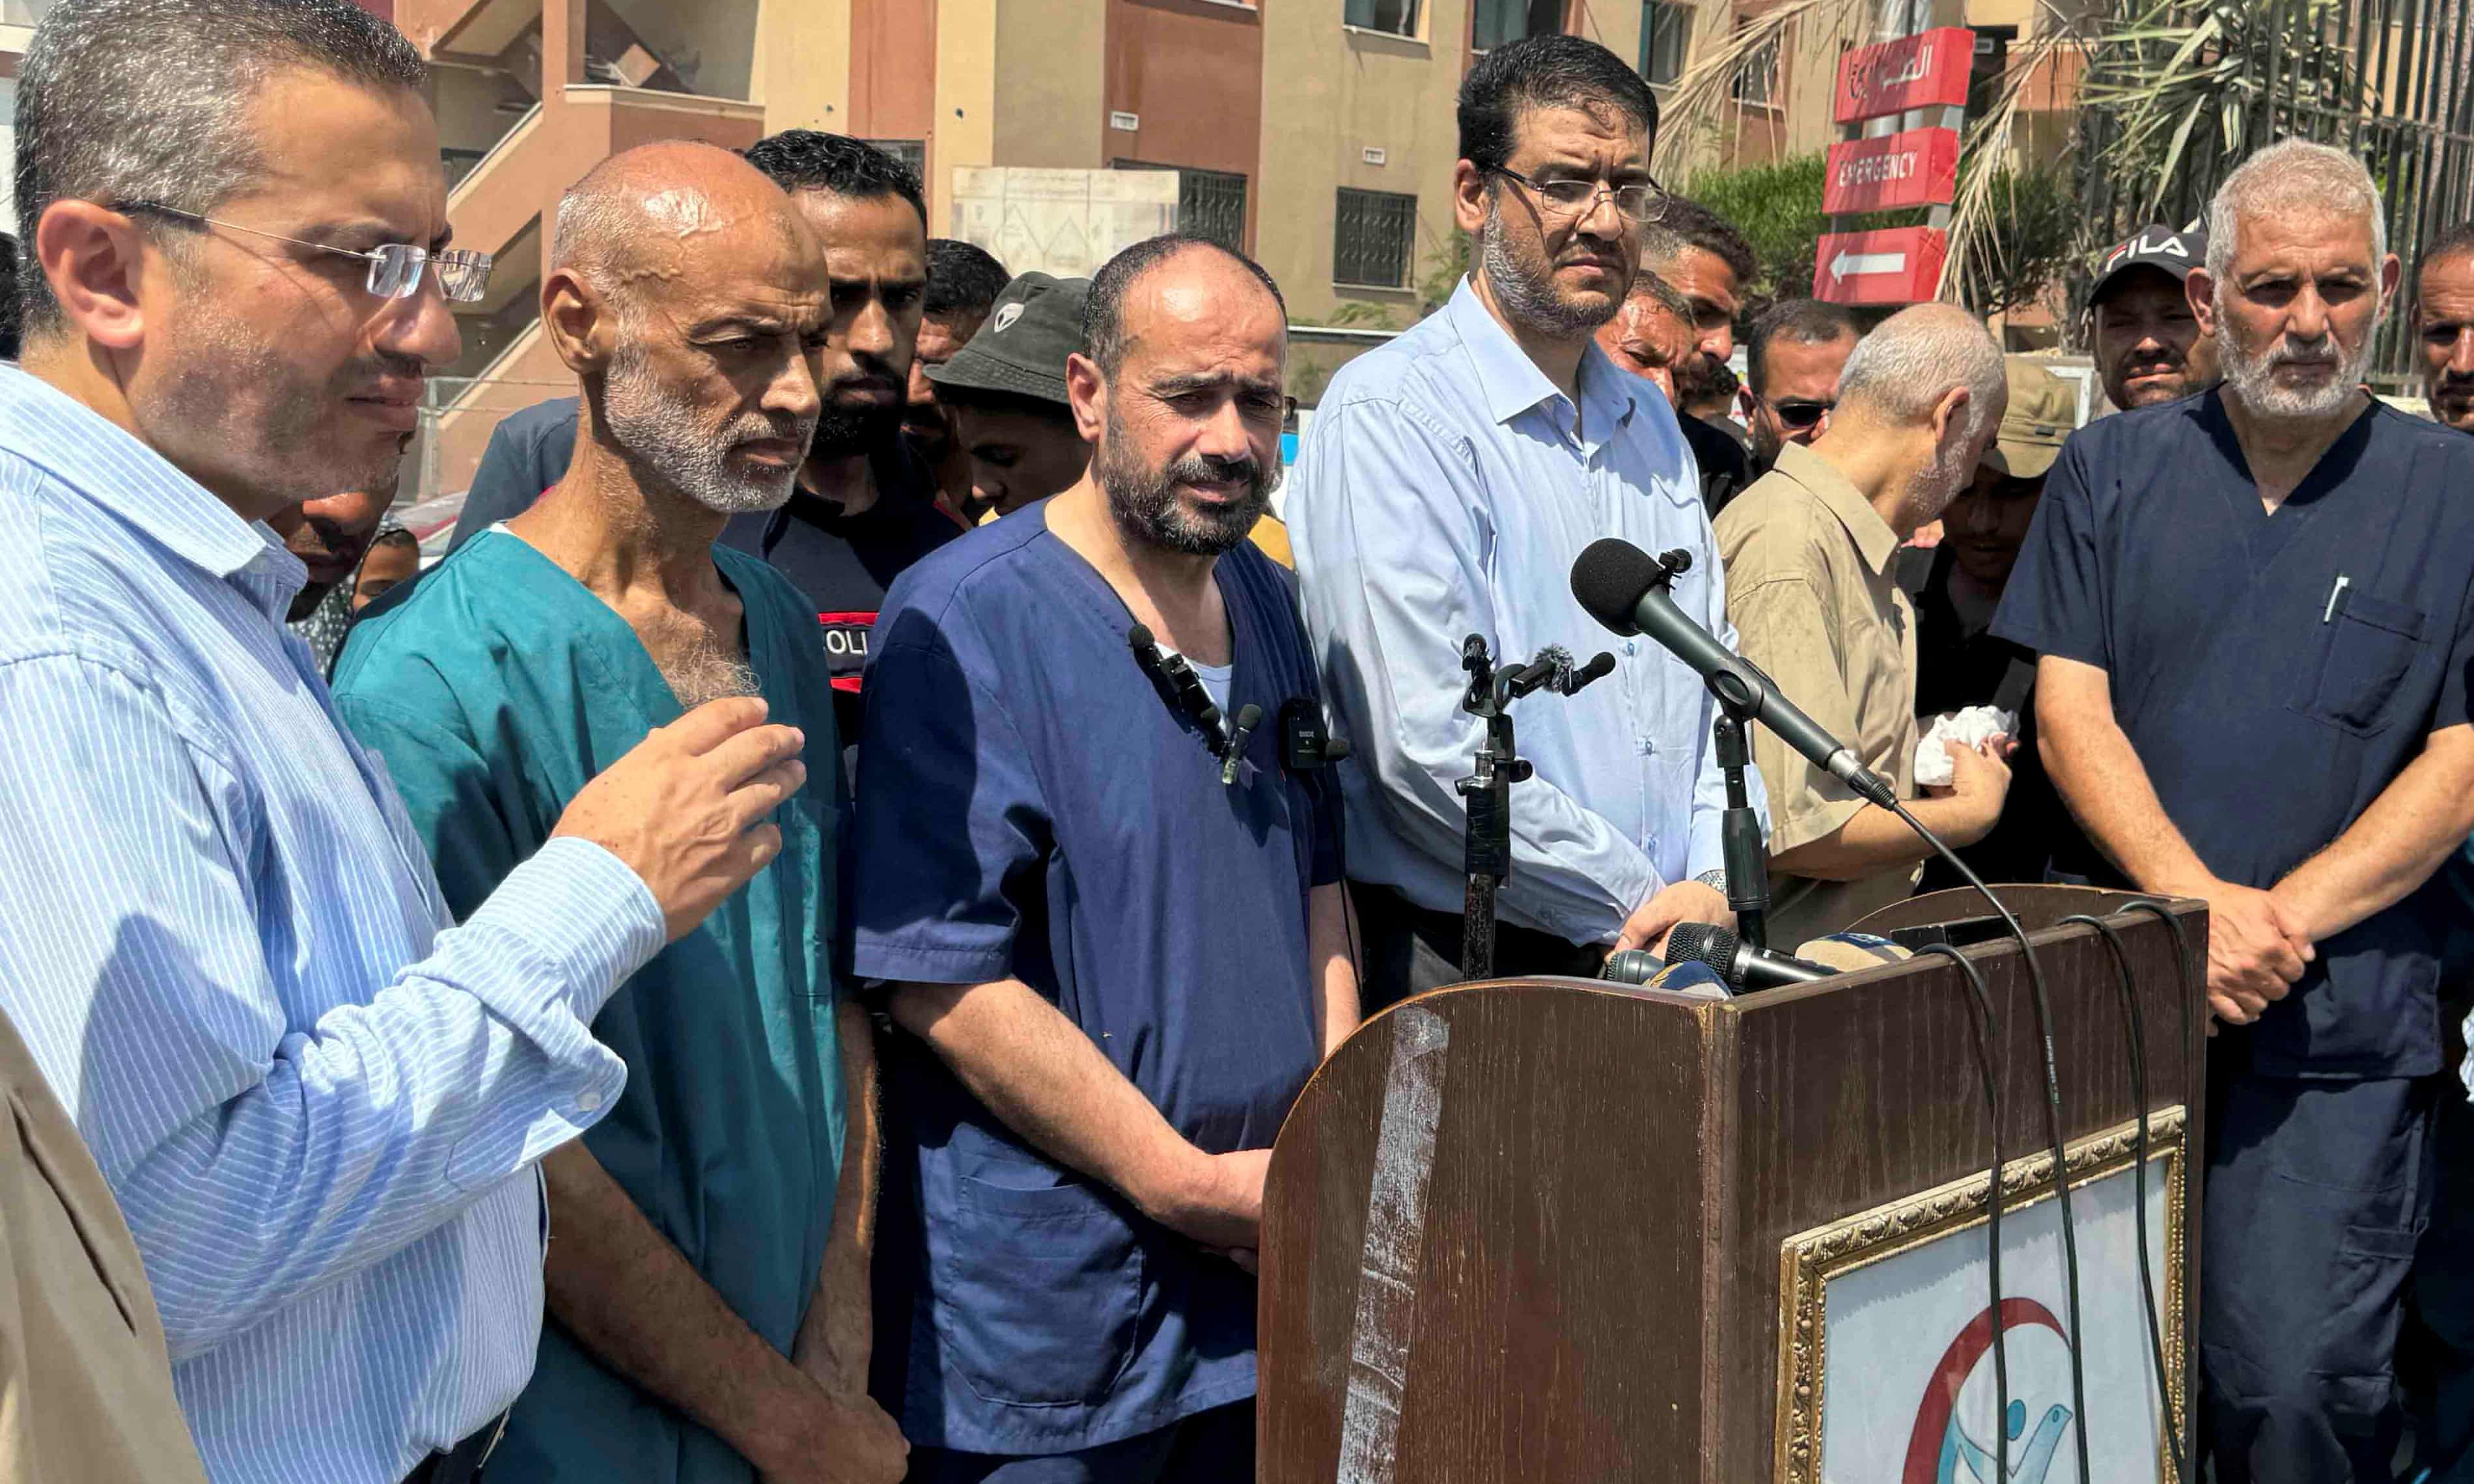 Al-Shifa hospital director release sparks row in Israel; army needs 10,000 soldiers, Israel defence minister says (theguardian.com)